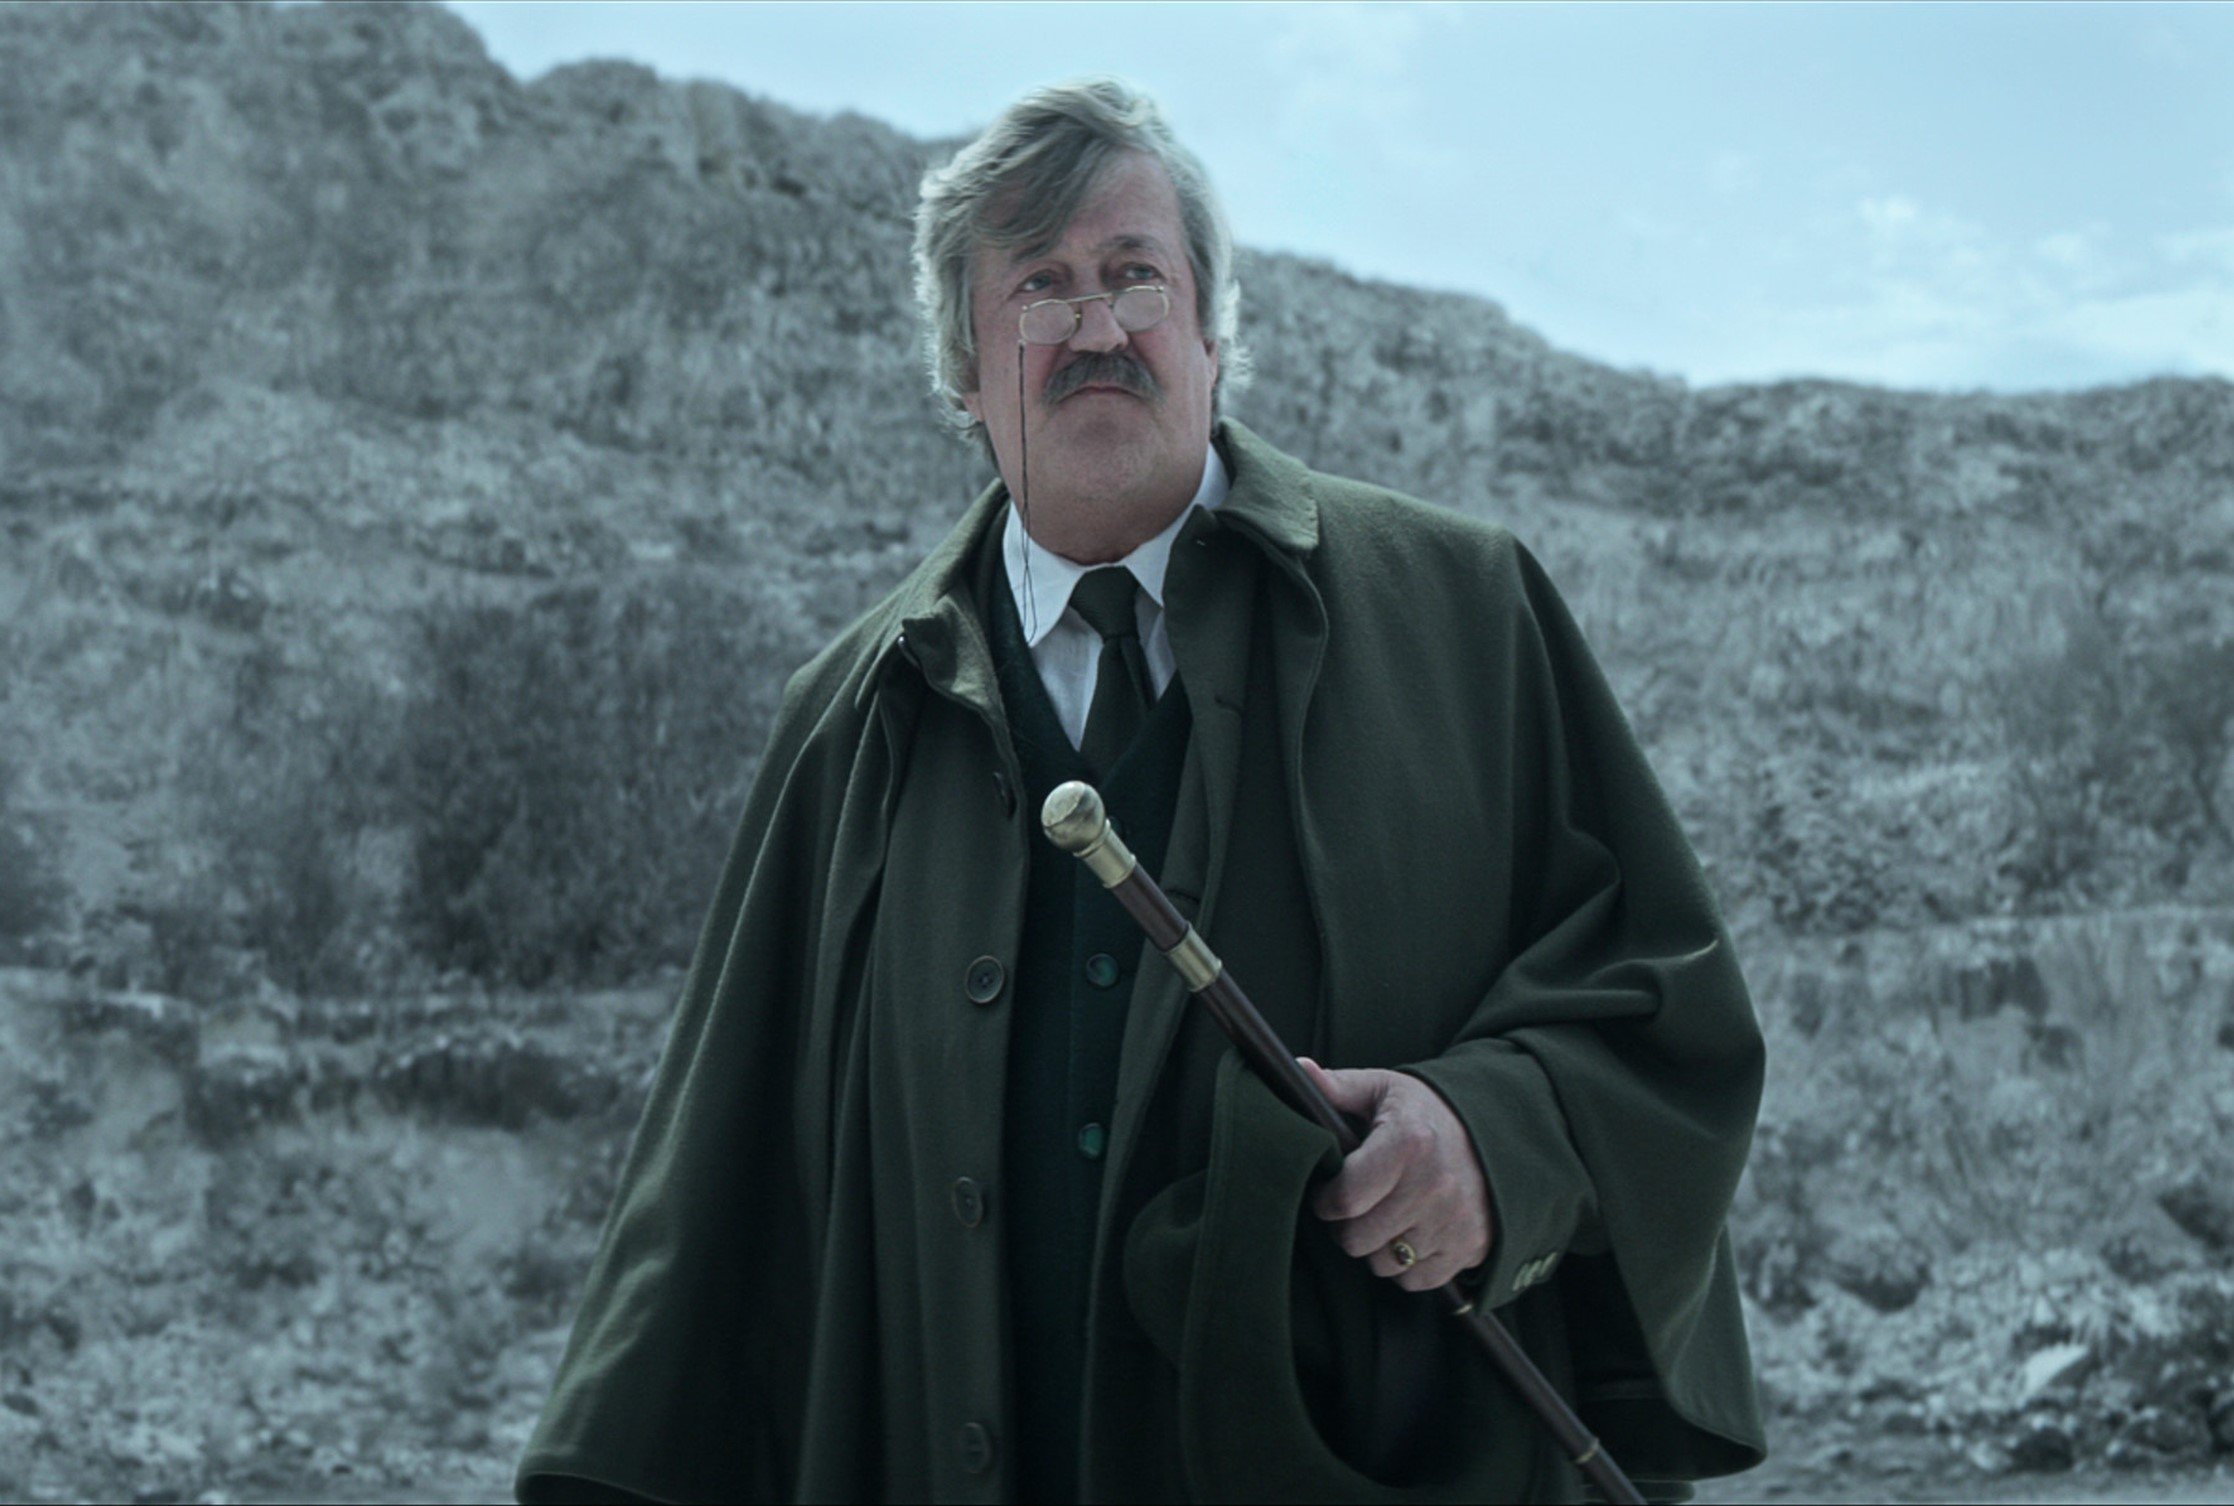 Stephen Fry as Gilbert in the cast of 'The Sandman.' He's holding a cane and standing before mountains.